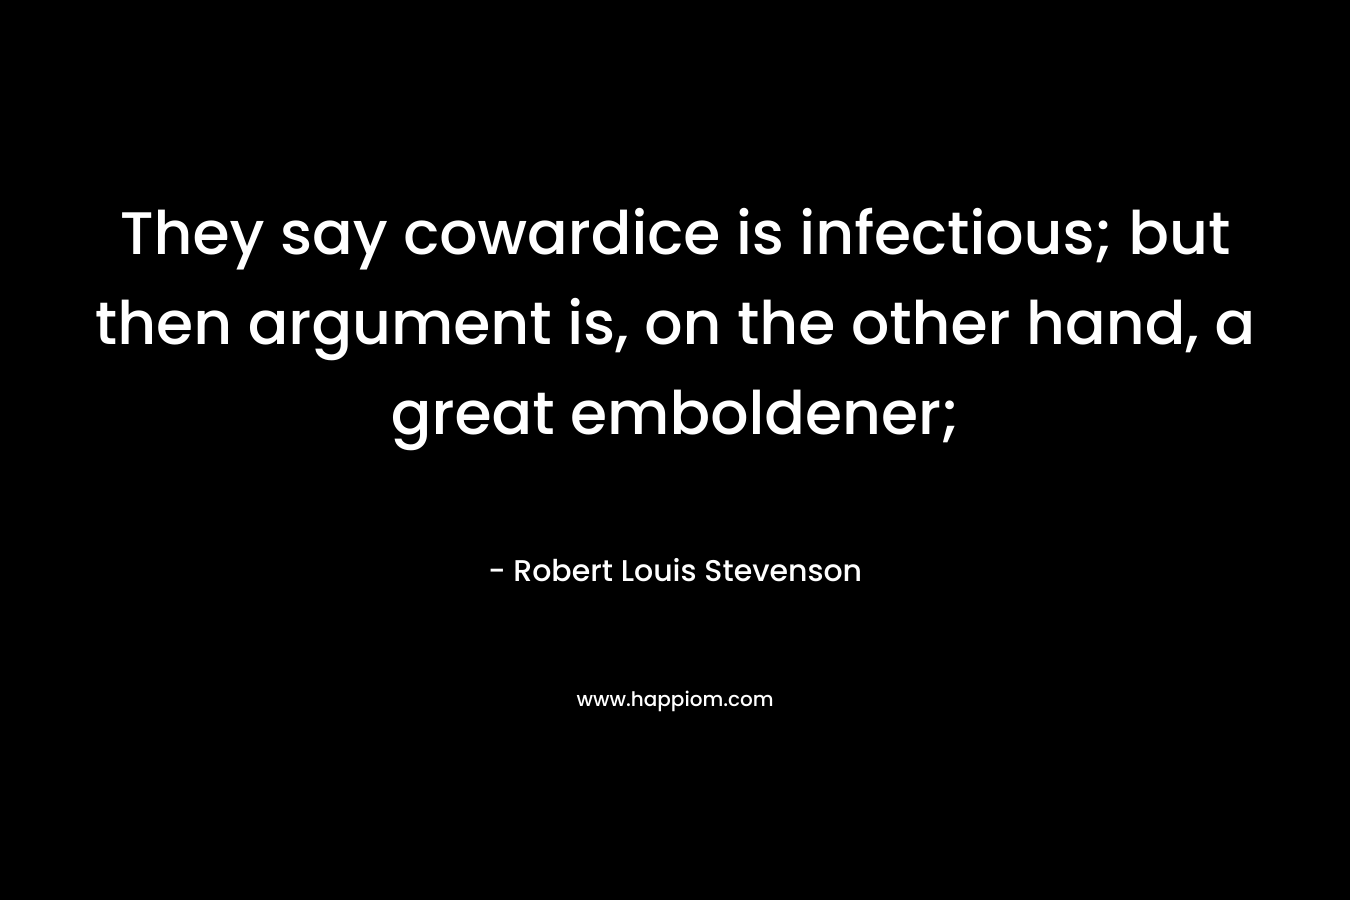 They say cowardice is infectious; but then argument is, on the other hand, a great emboldener; – Robert Louis Stevenson